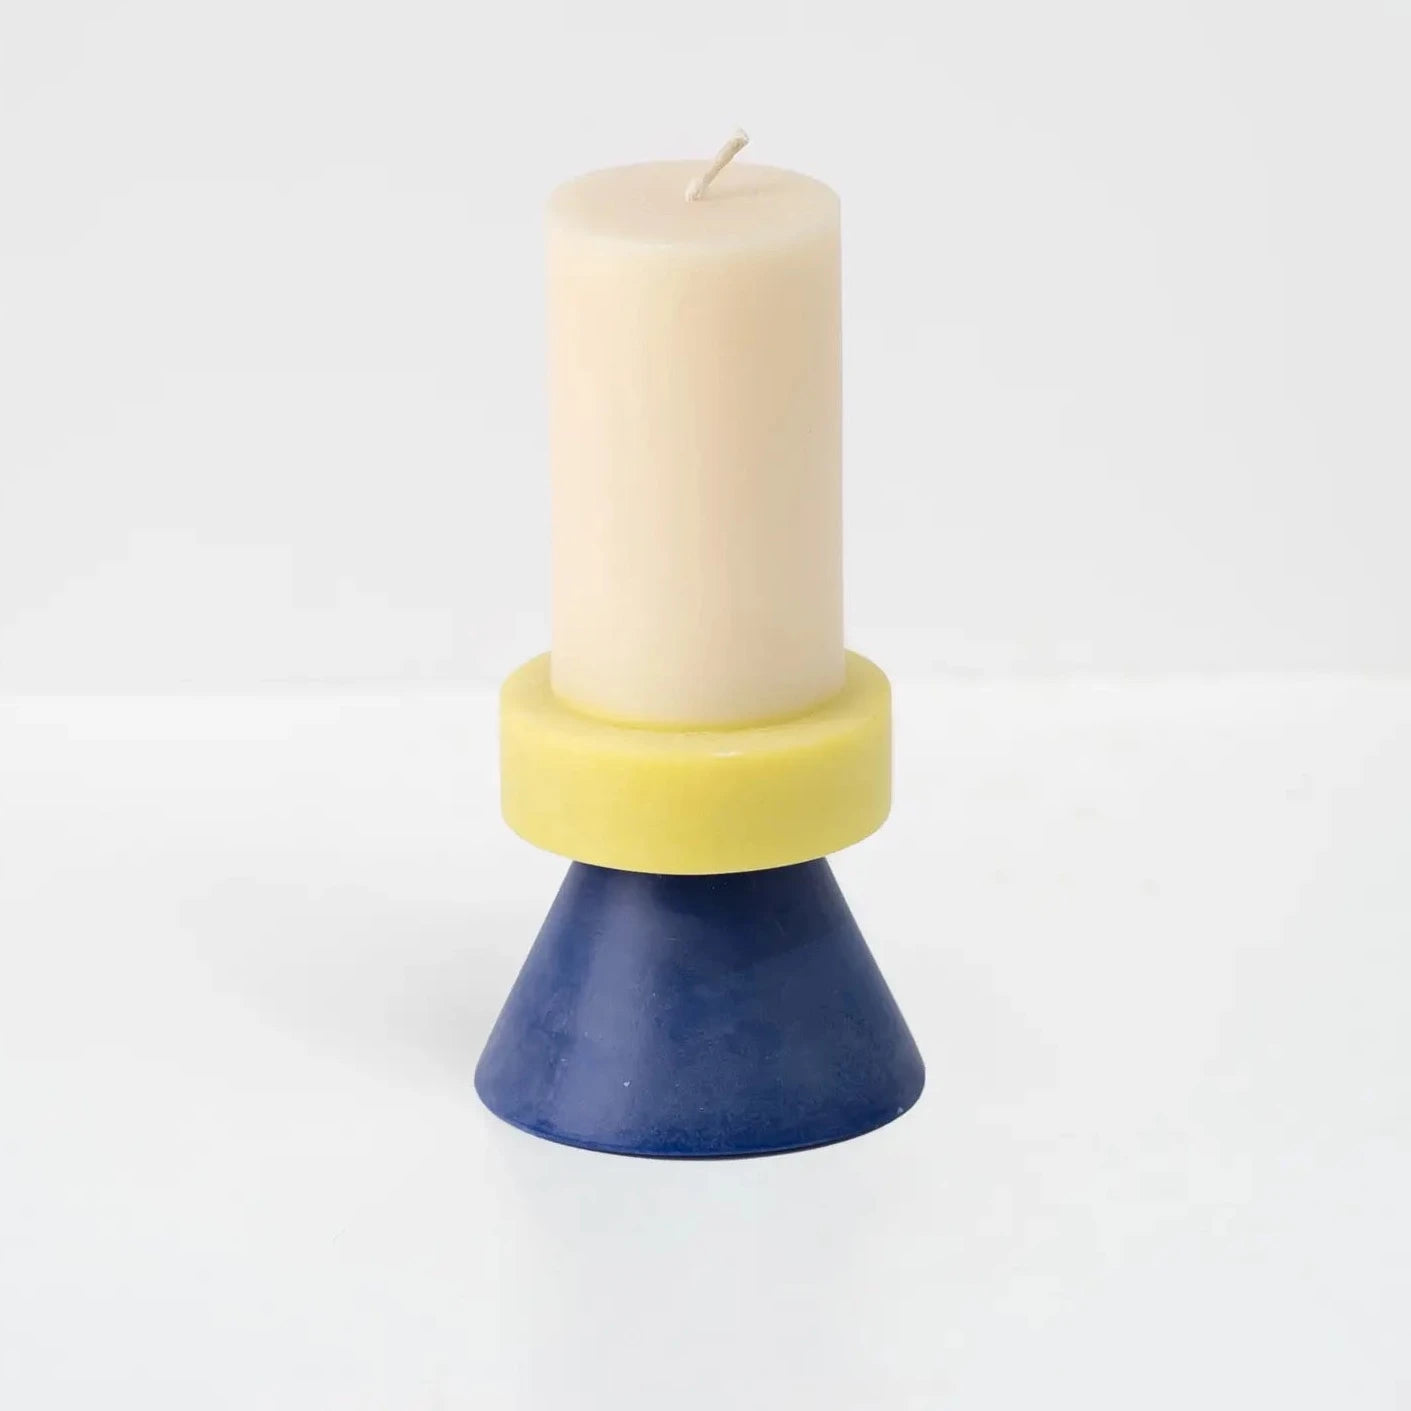 Stack Candle - tall - white / yellow / blue